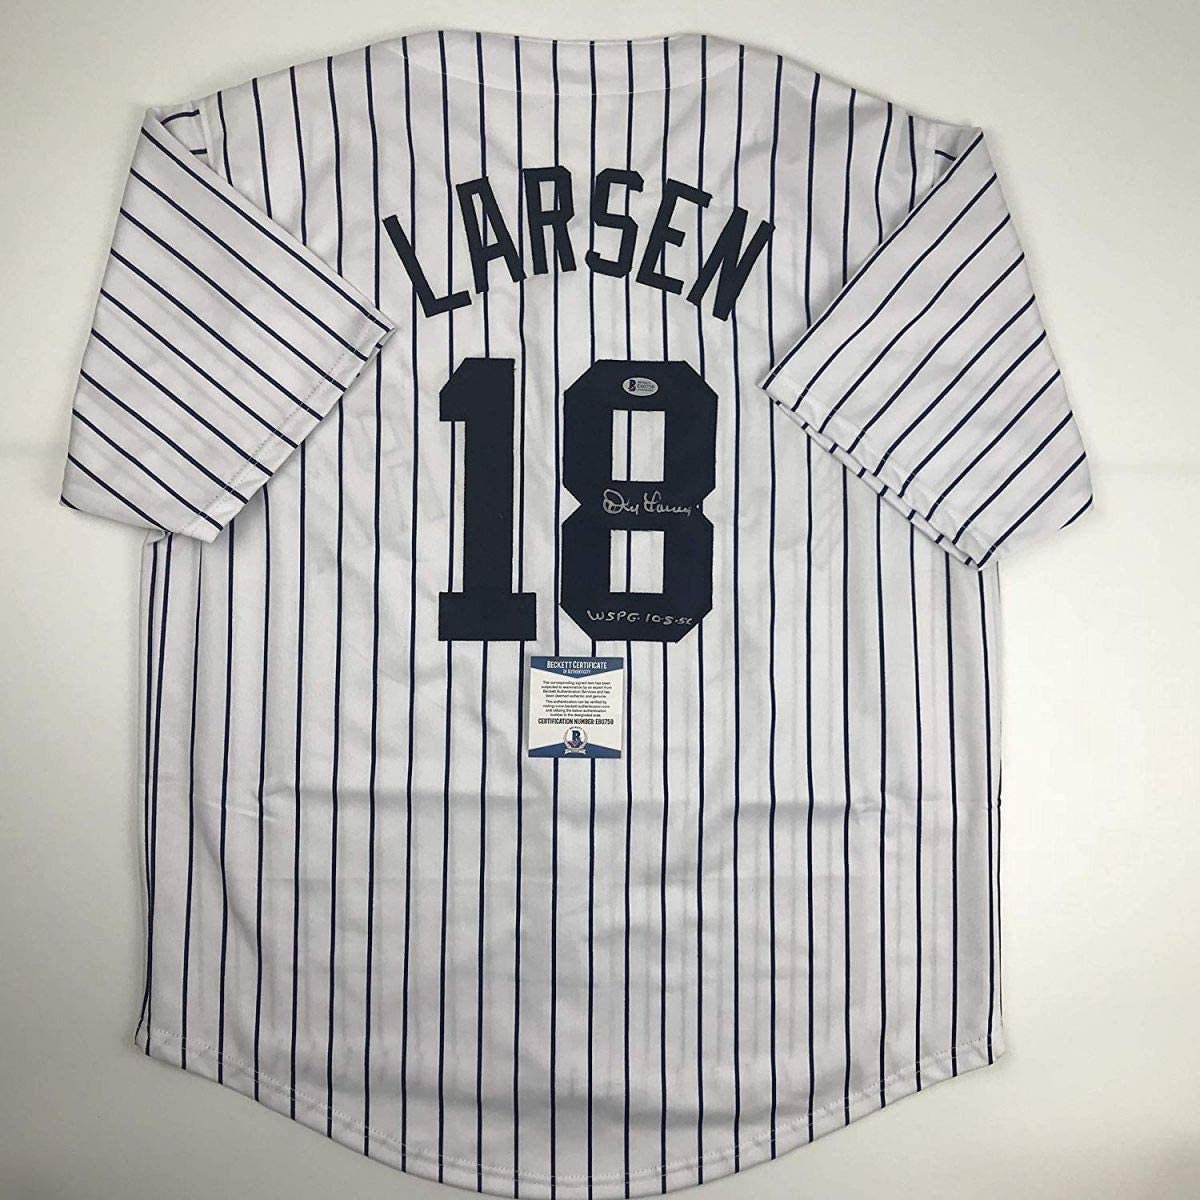 Autographed/signed Don Larsen WS PG 10 8 56 New York Pinstripe 